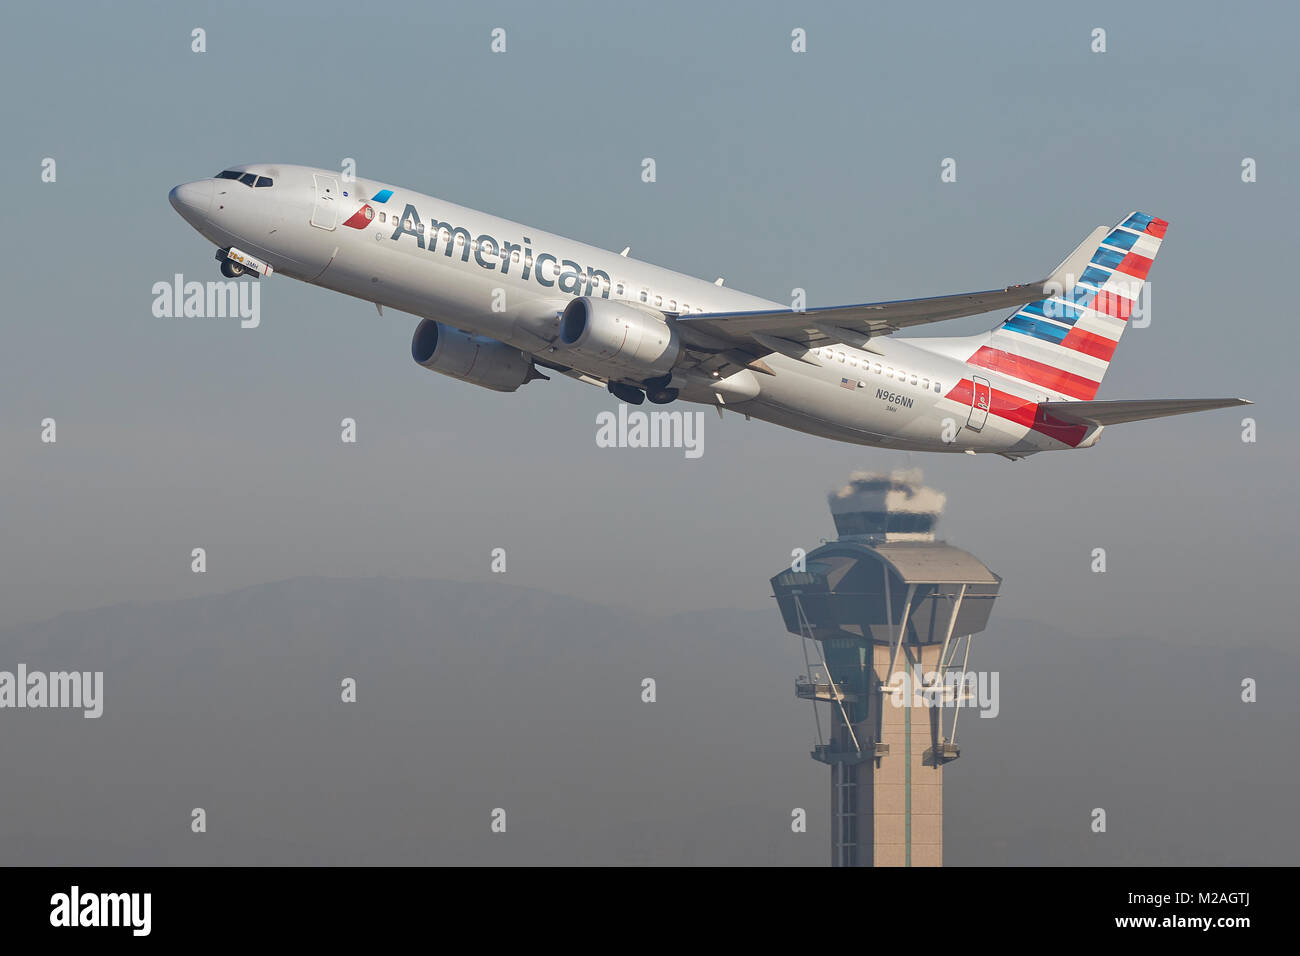 American Airlines Boeing 737-800 Taking Off From Runway 25 Left At Los Angeles International Airport, The Control Tower In the Background. Stock Photo